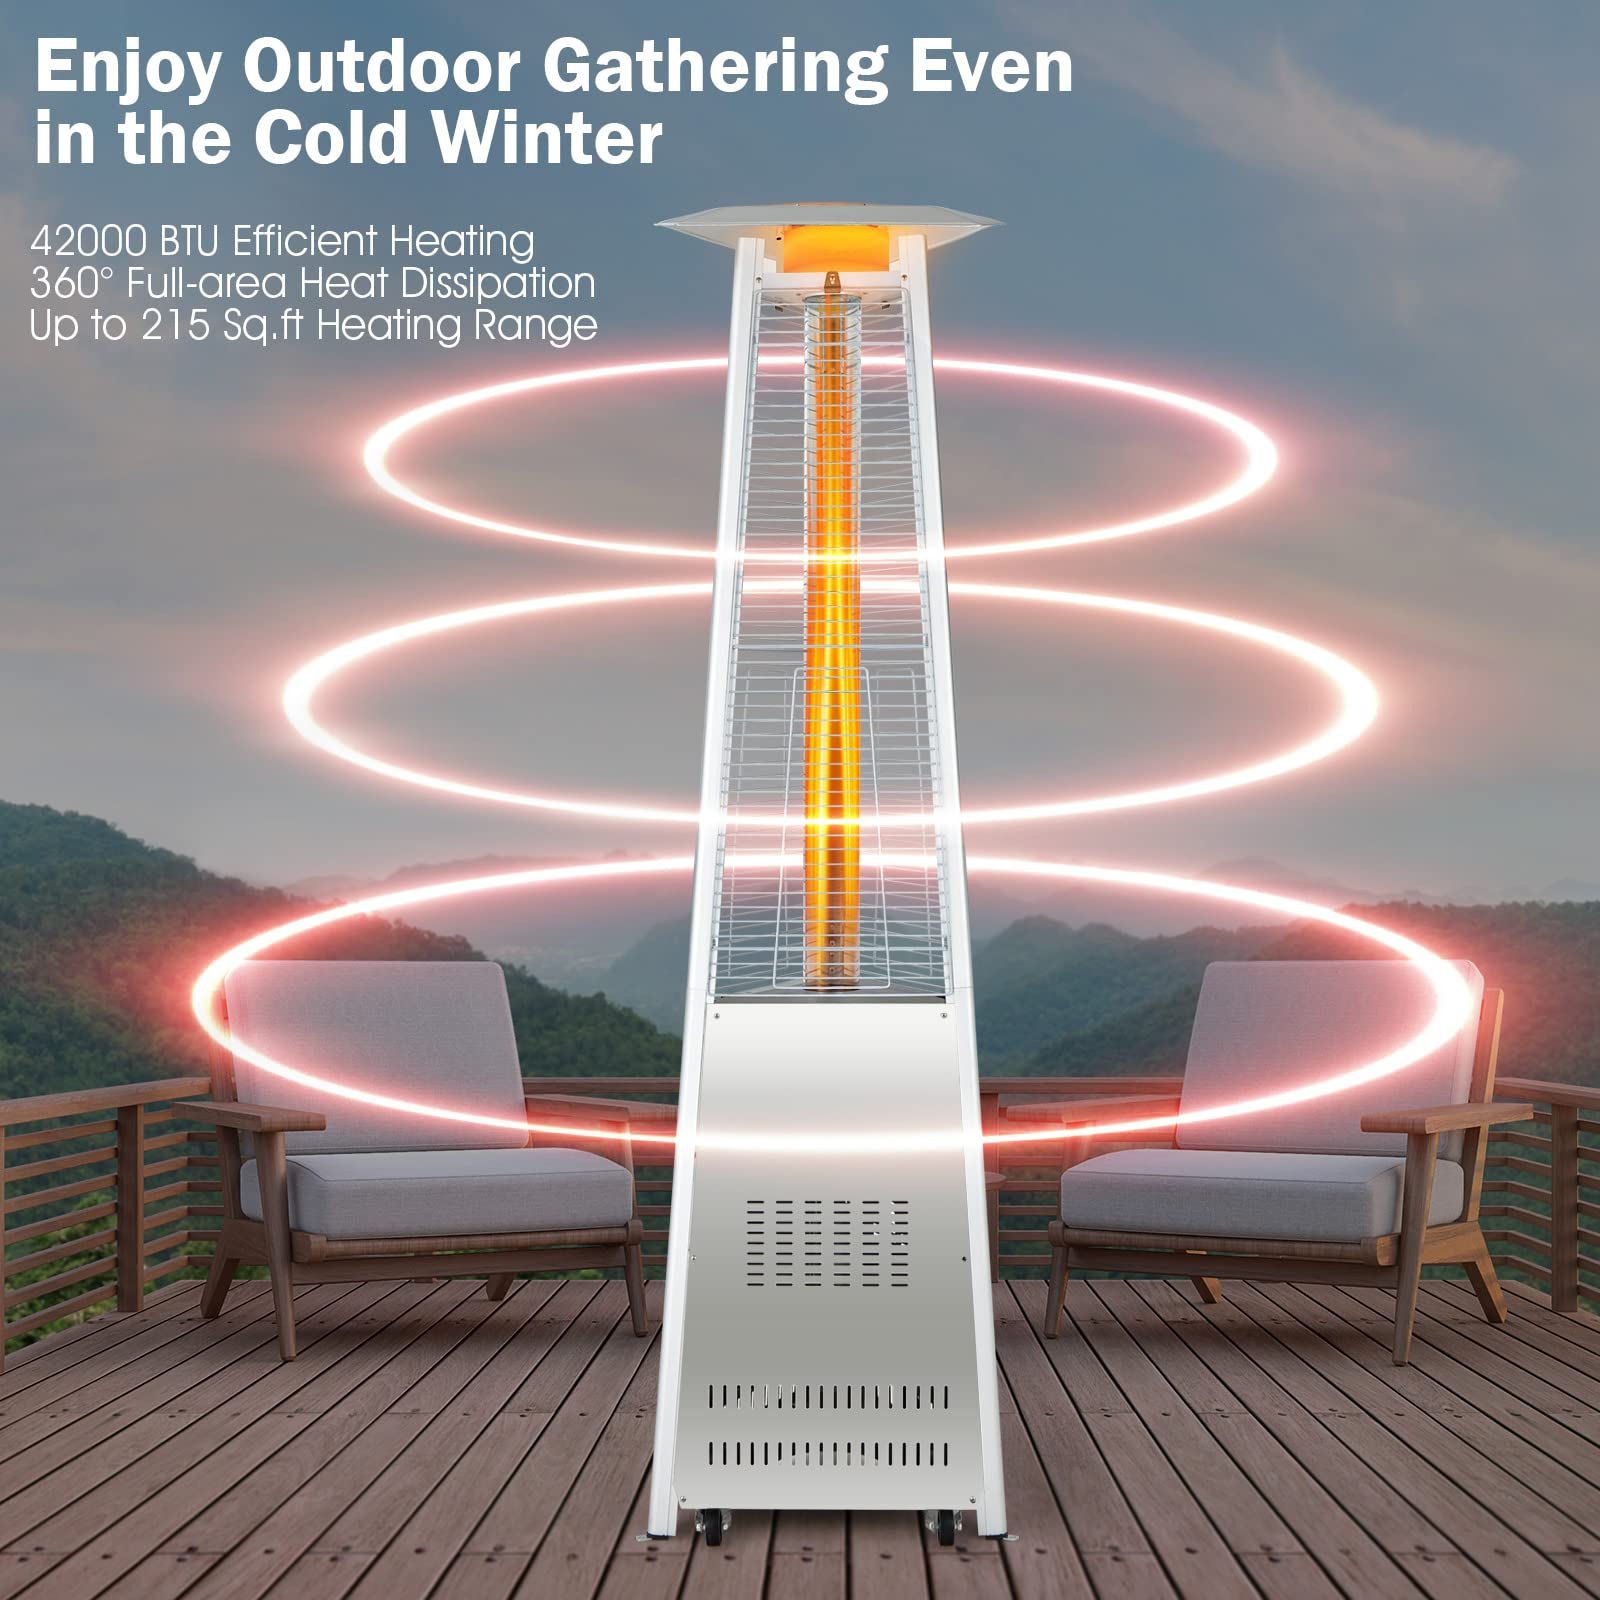 Outdoor Heater with Tip-Over & Flameout Protection for Backyard, Garden (Silver)